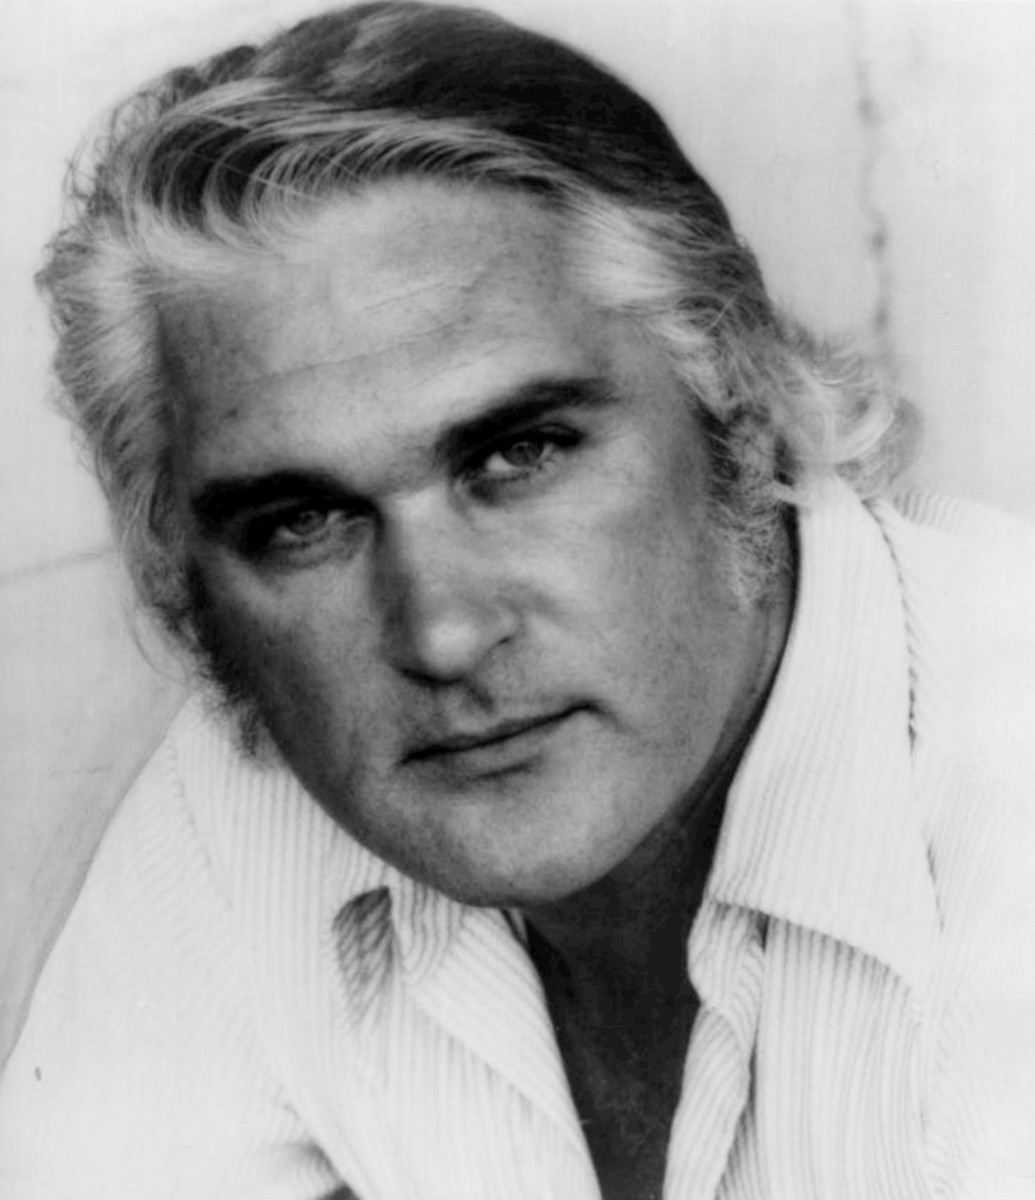 Peering in to What Is Behind Closed Doors in the Charlie Rich Classic